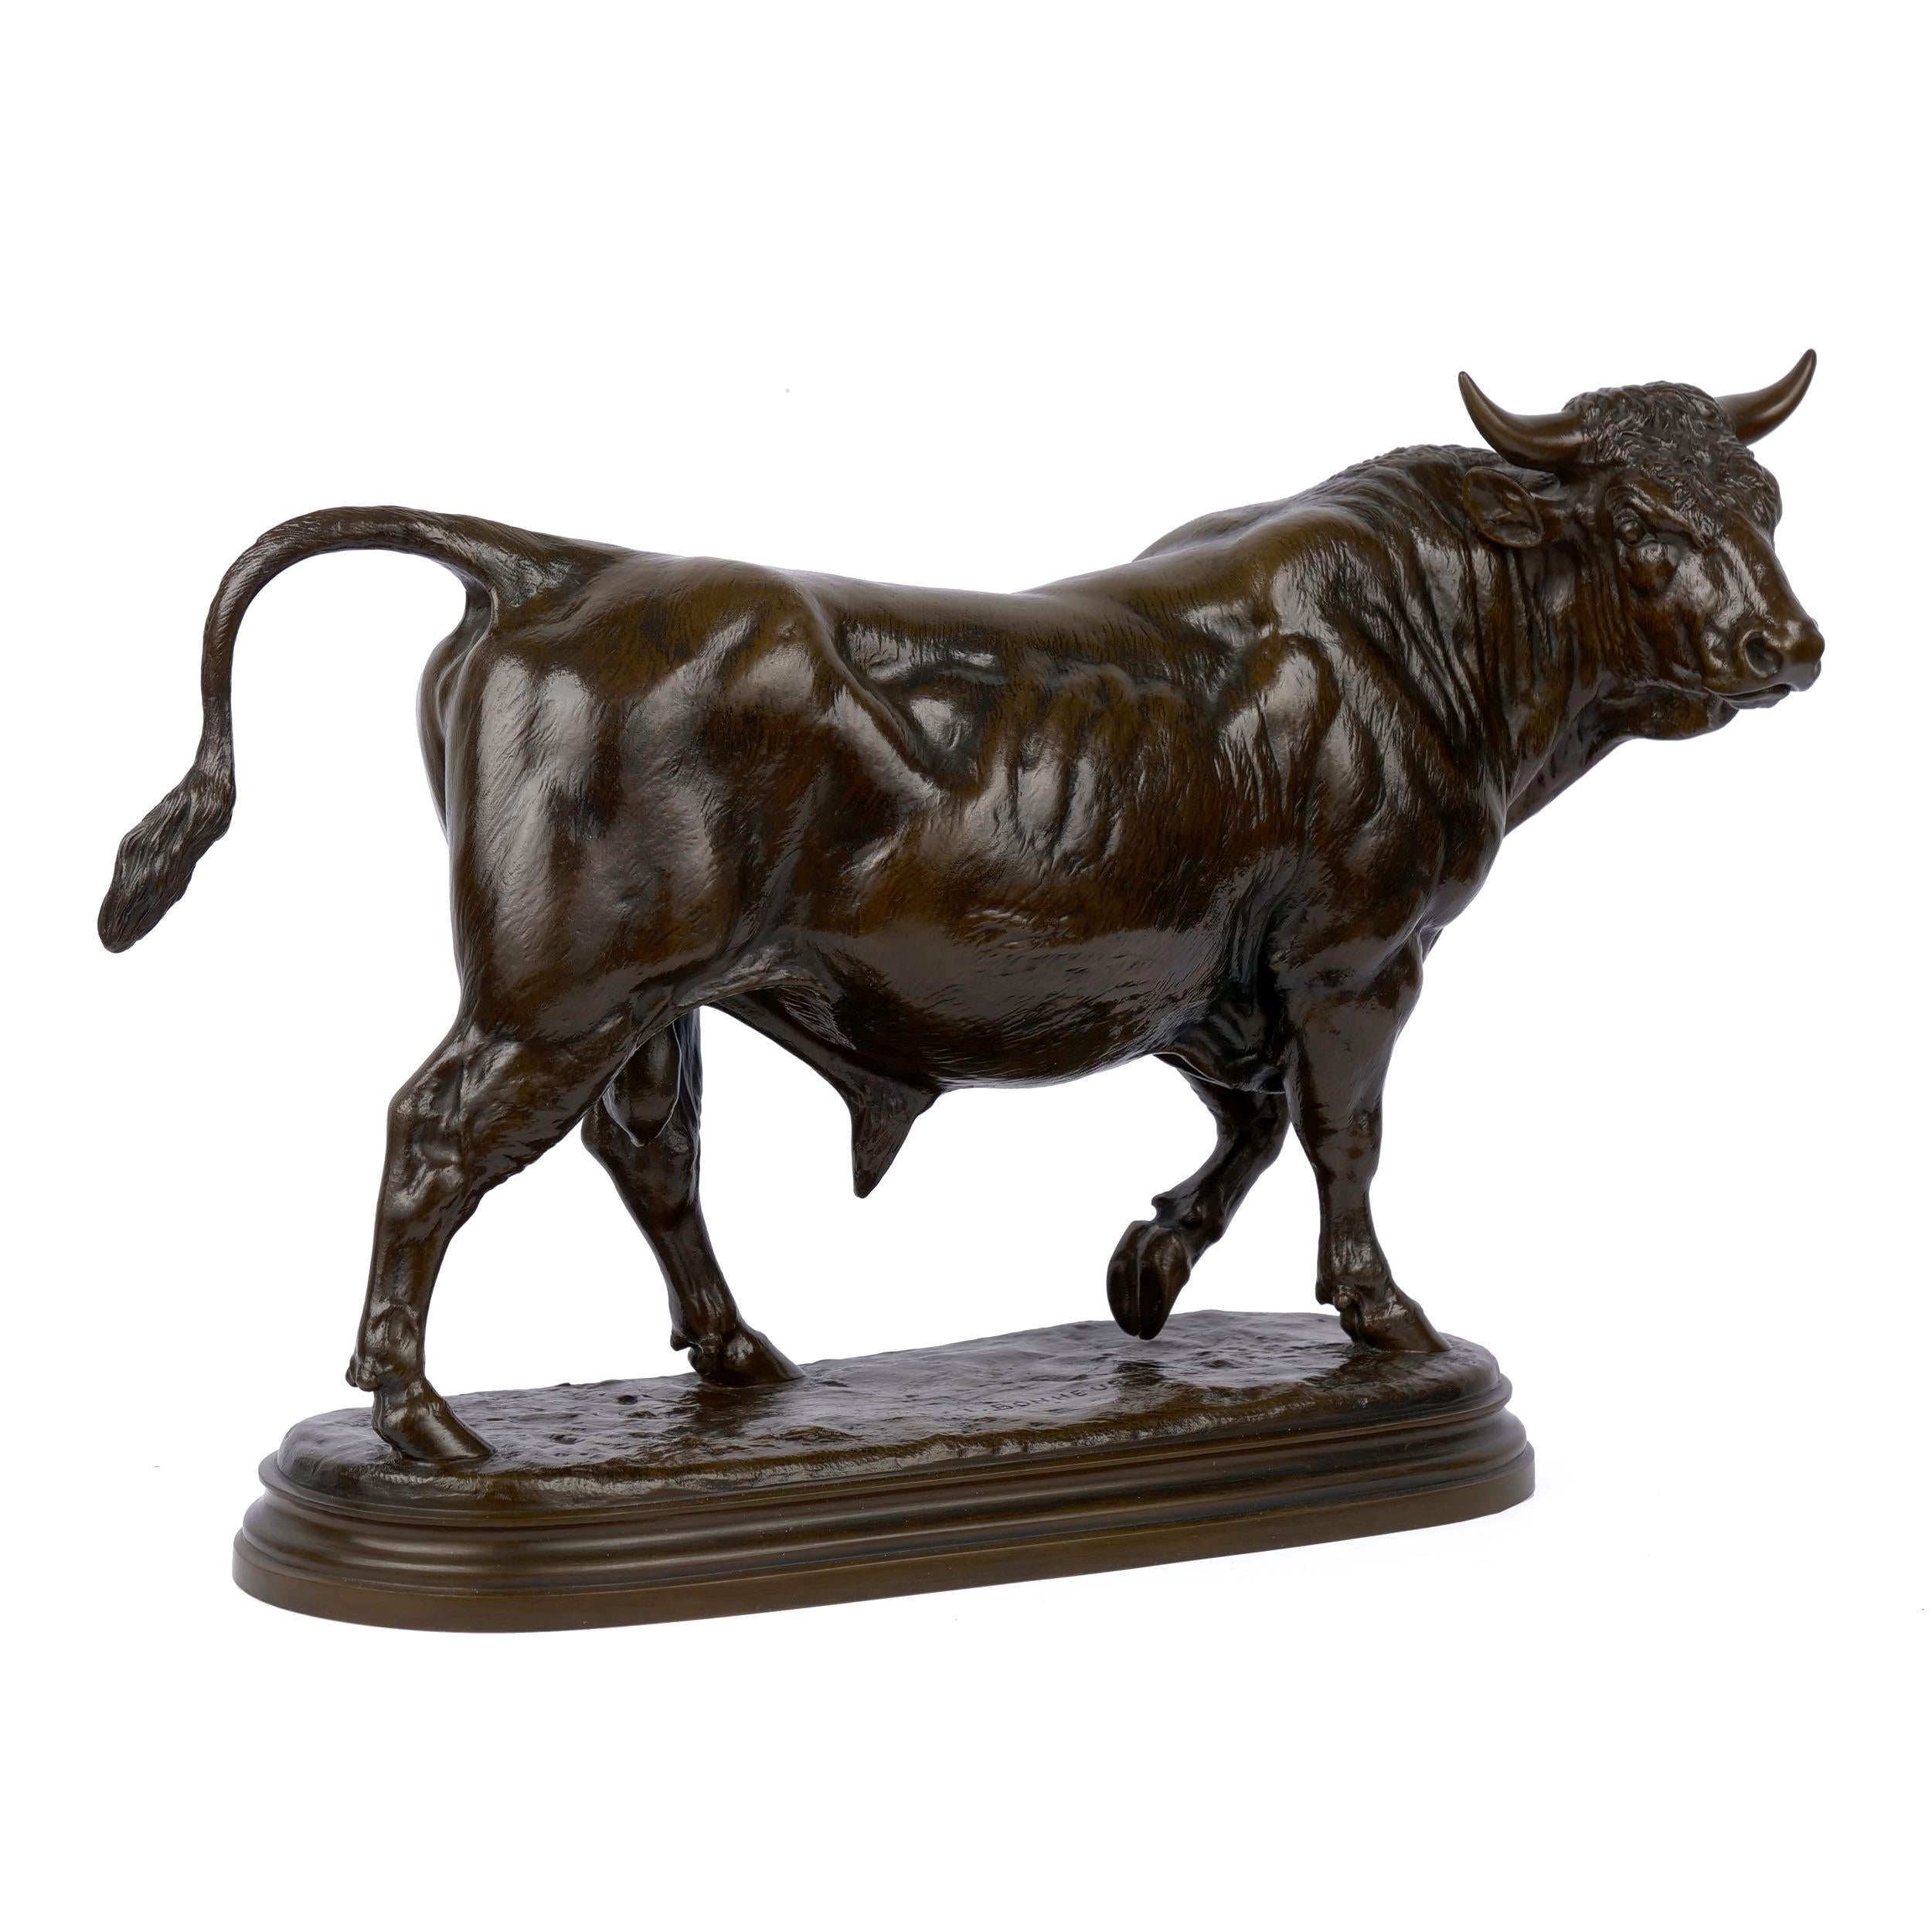 French Bronze Sculpture of “Striding Bull” by Isidore Jules Bonheur, Cast by Peyrol